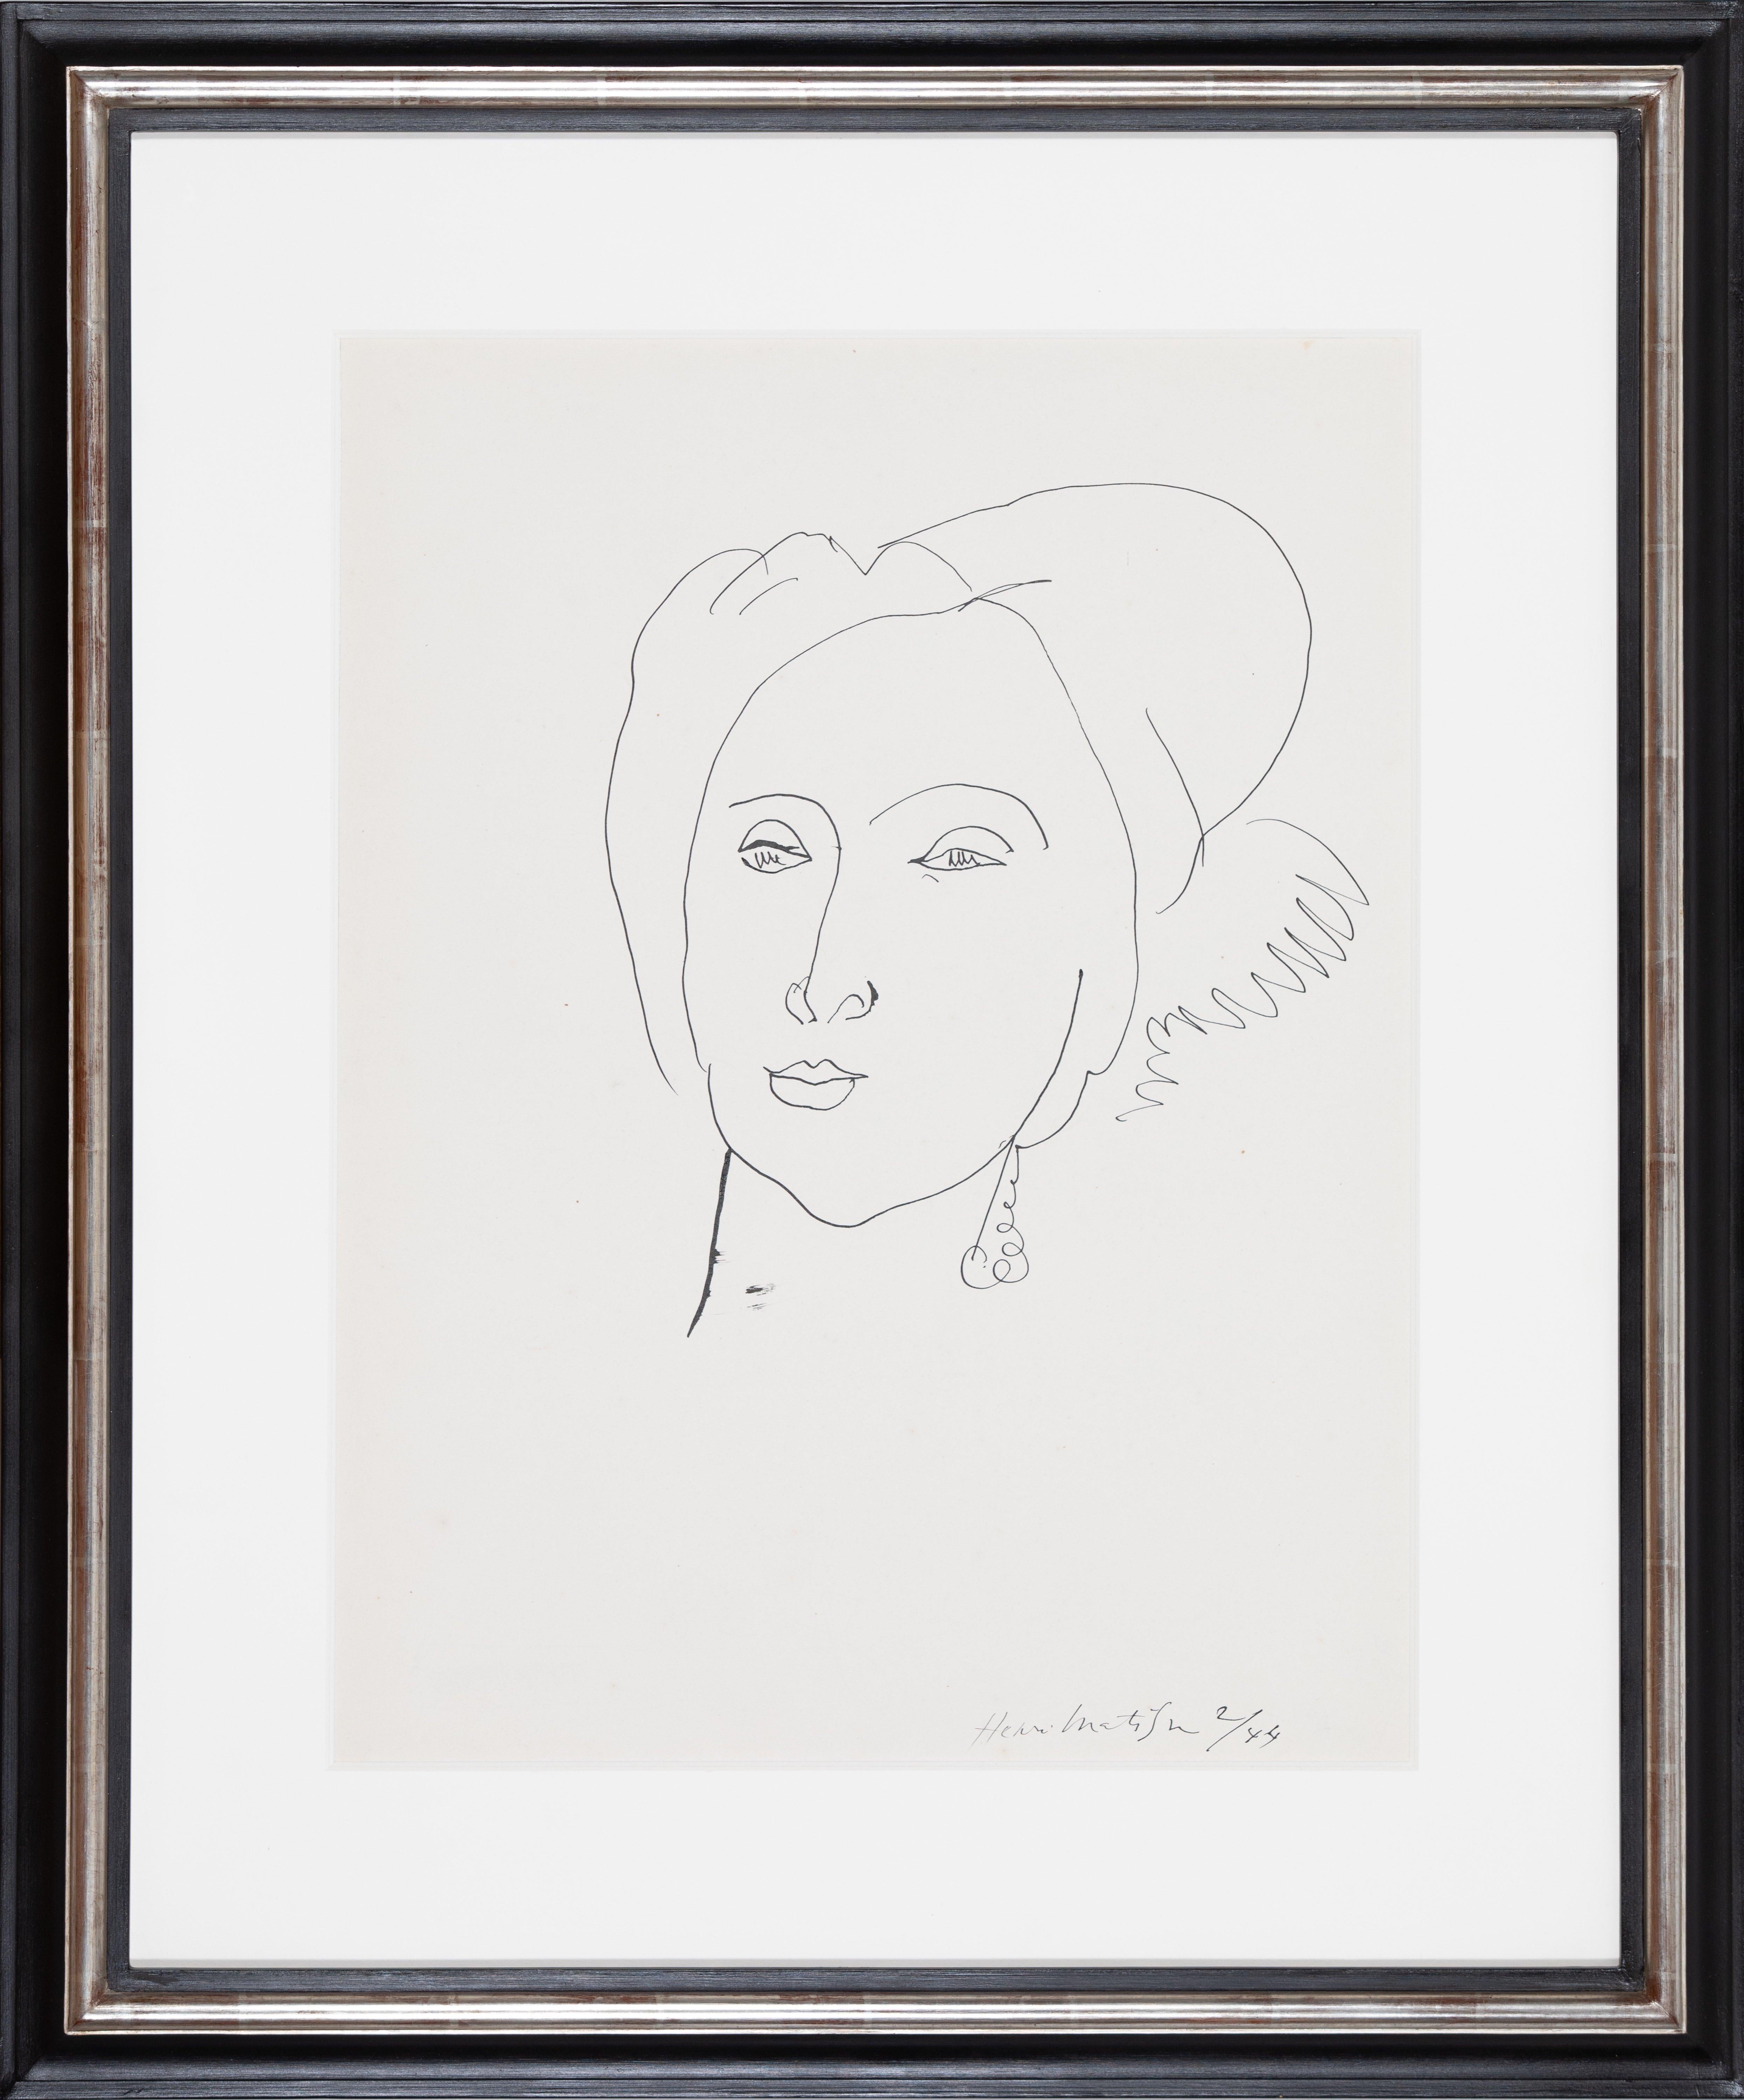 *PLEASE NOTE UK BUYERS WILL ONLY PAY 5% VAT ON THIS PURCHASE.

Le Turban by Henri Matisse (1869-1954)
Pen and India ink on paper
51.5 x 39 cm (20 ¹/₄ x 15 ³/₈ inches)
Signed and dated lower right, Henri Matisse 2/44

This work is accompanied by a